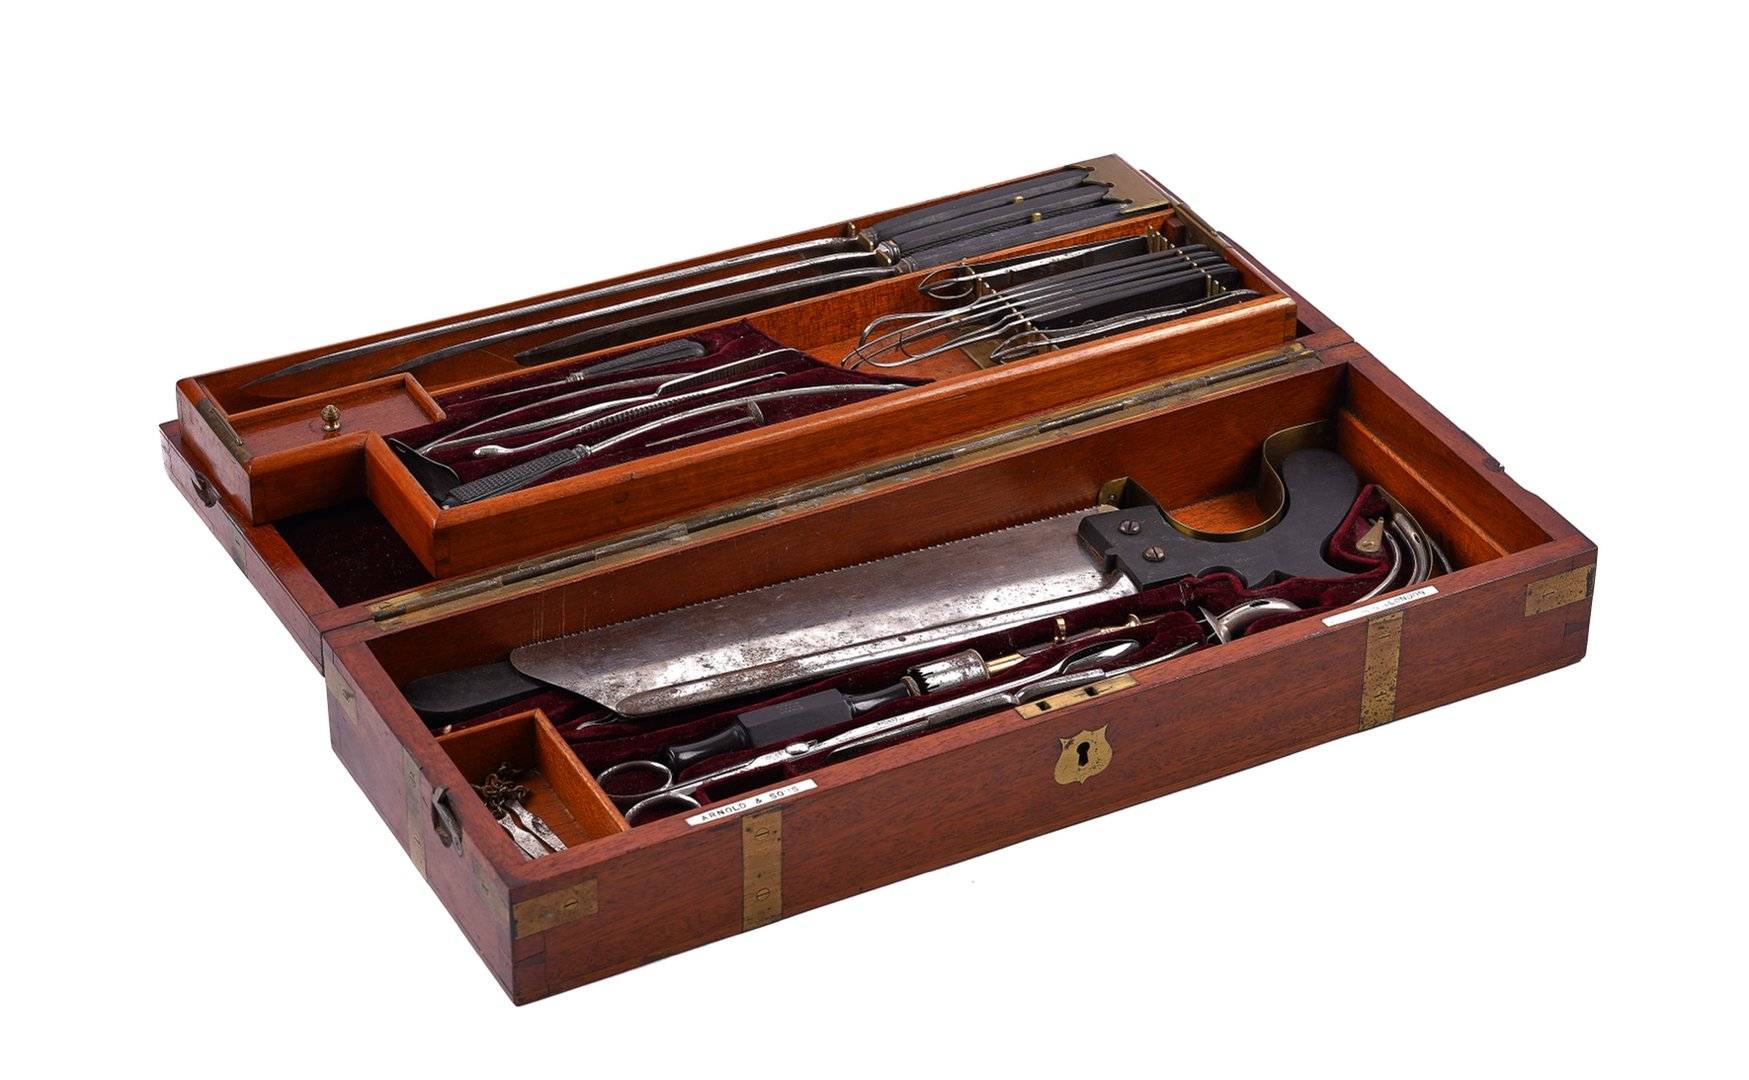 ARNOLD & SONS; A BRASS BOUND MAHOGANY CASED FIELD SURGEON’S KIT